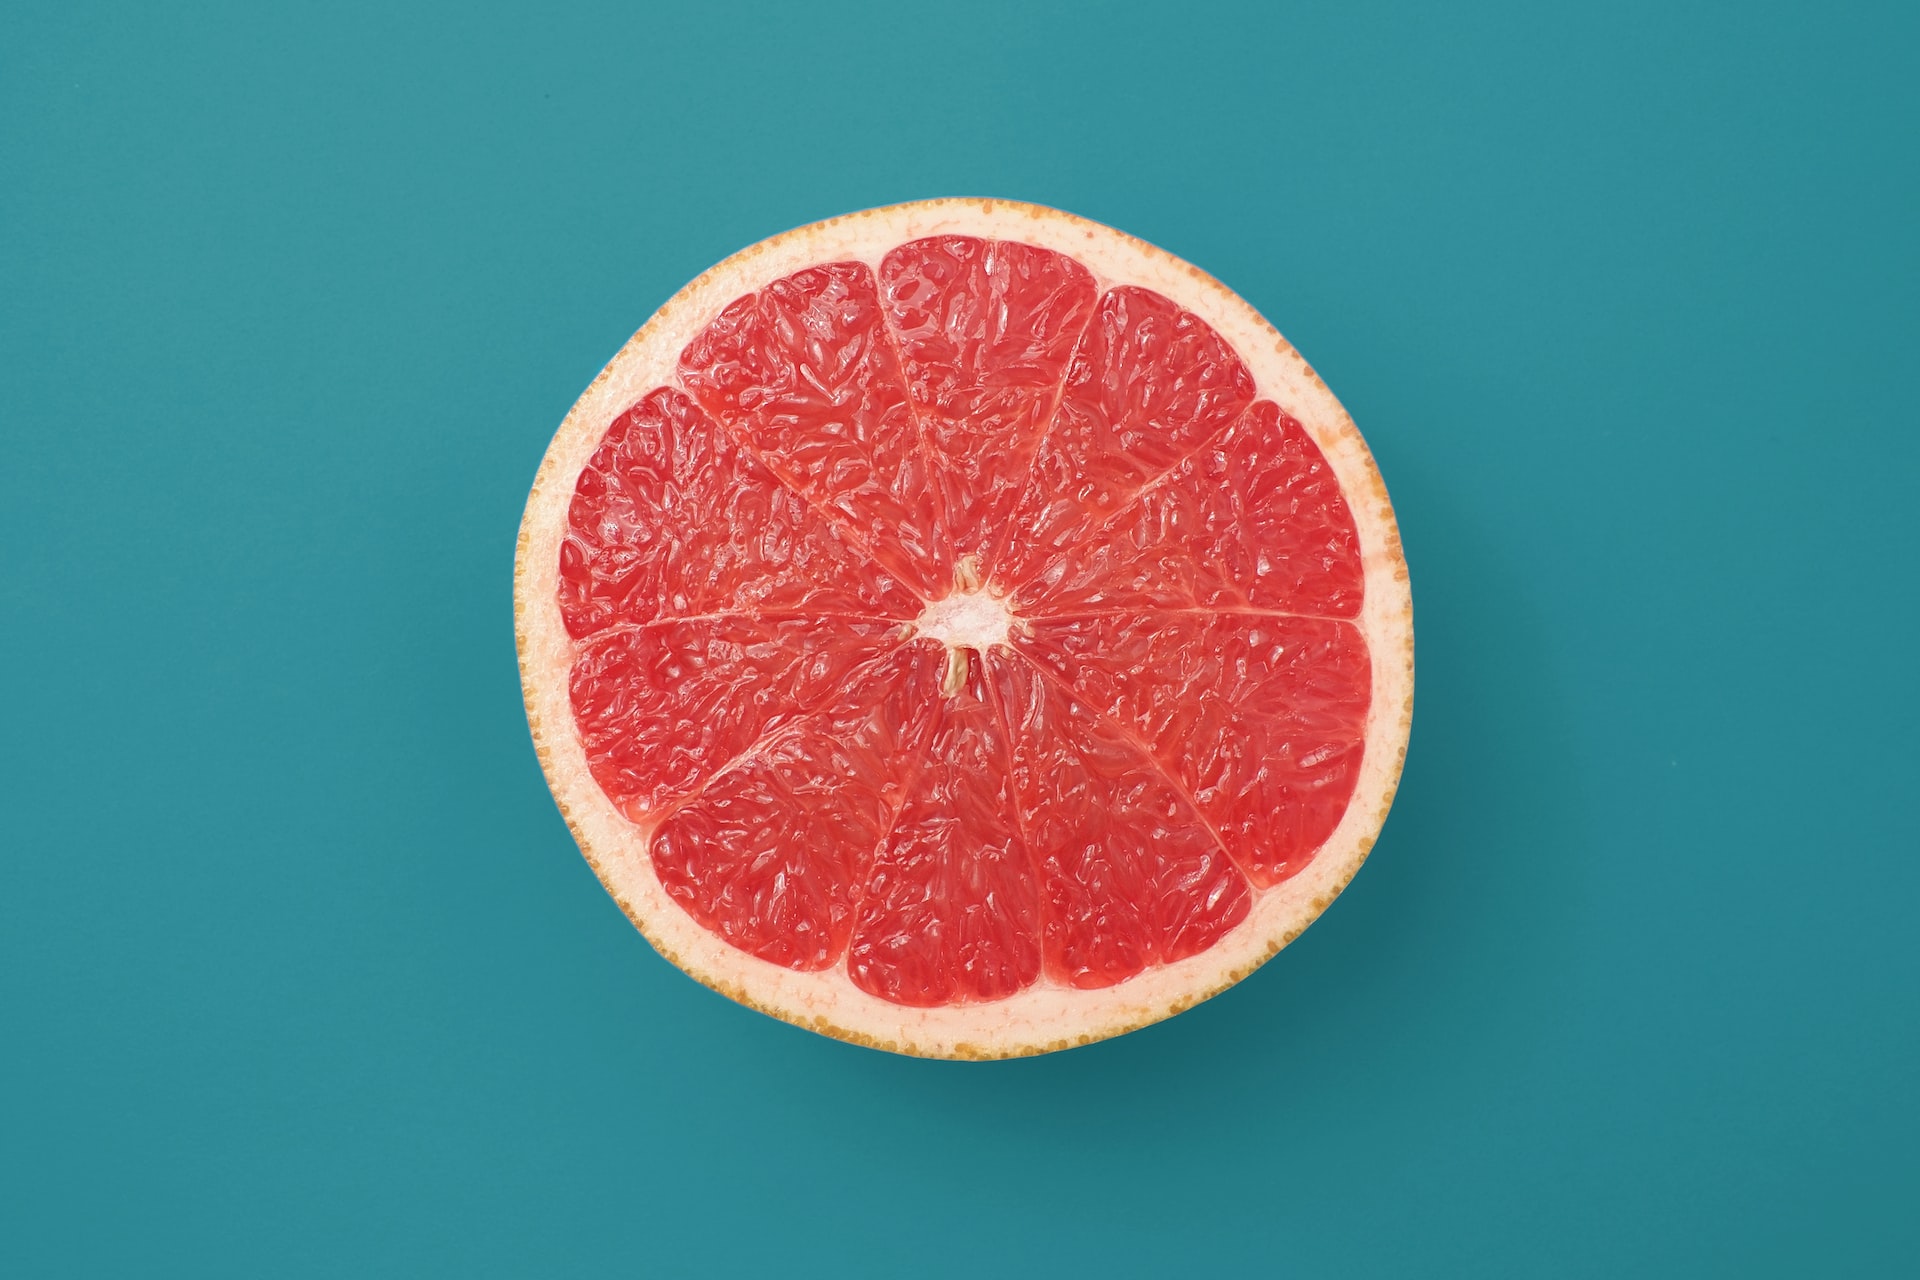 Grapefruit: A Versatile and Nutritious Fruit for Cooking and Snacking